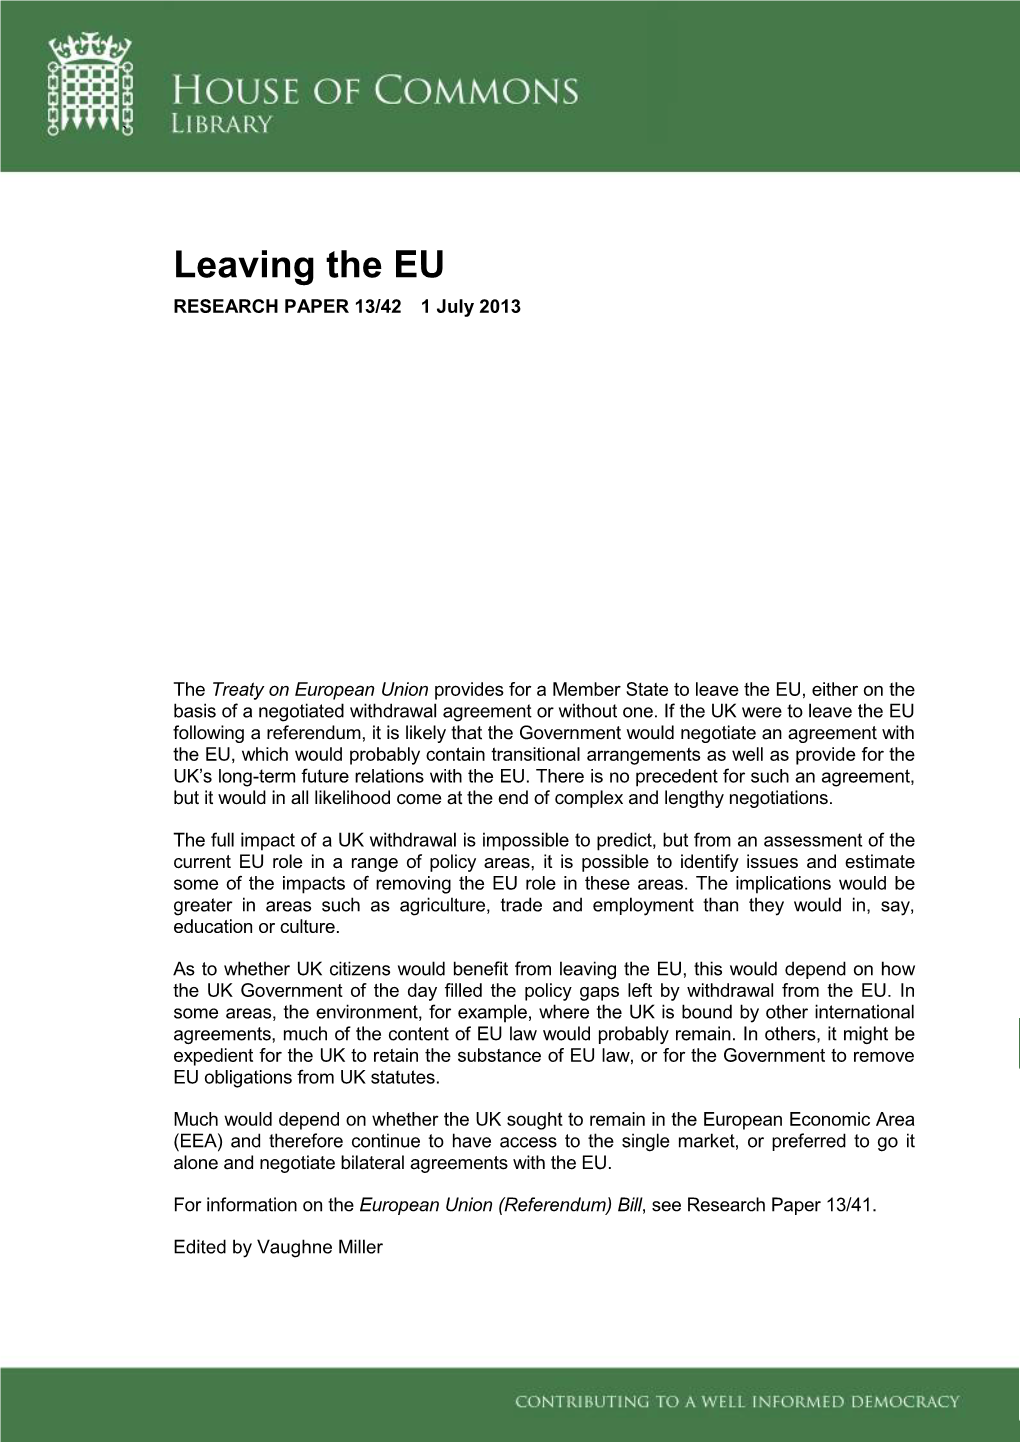 Leaving the EU RESEARCH PAPER 13/42 1 July 2013